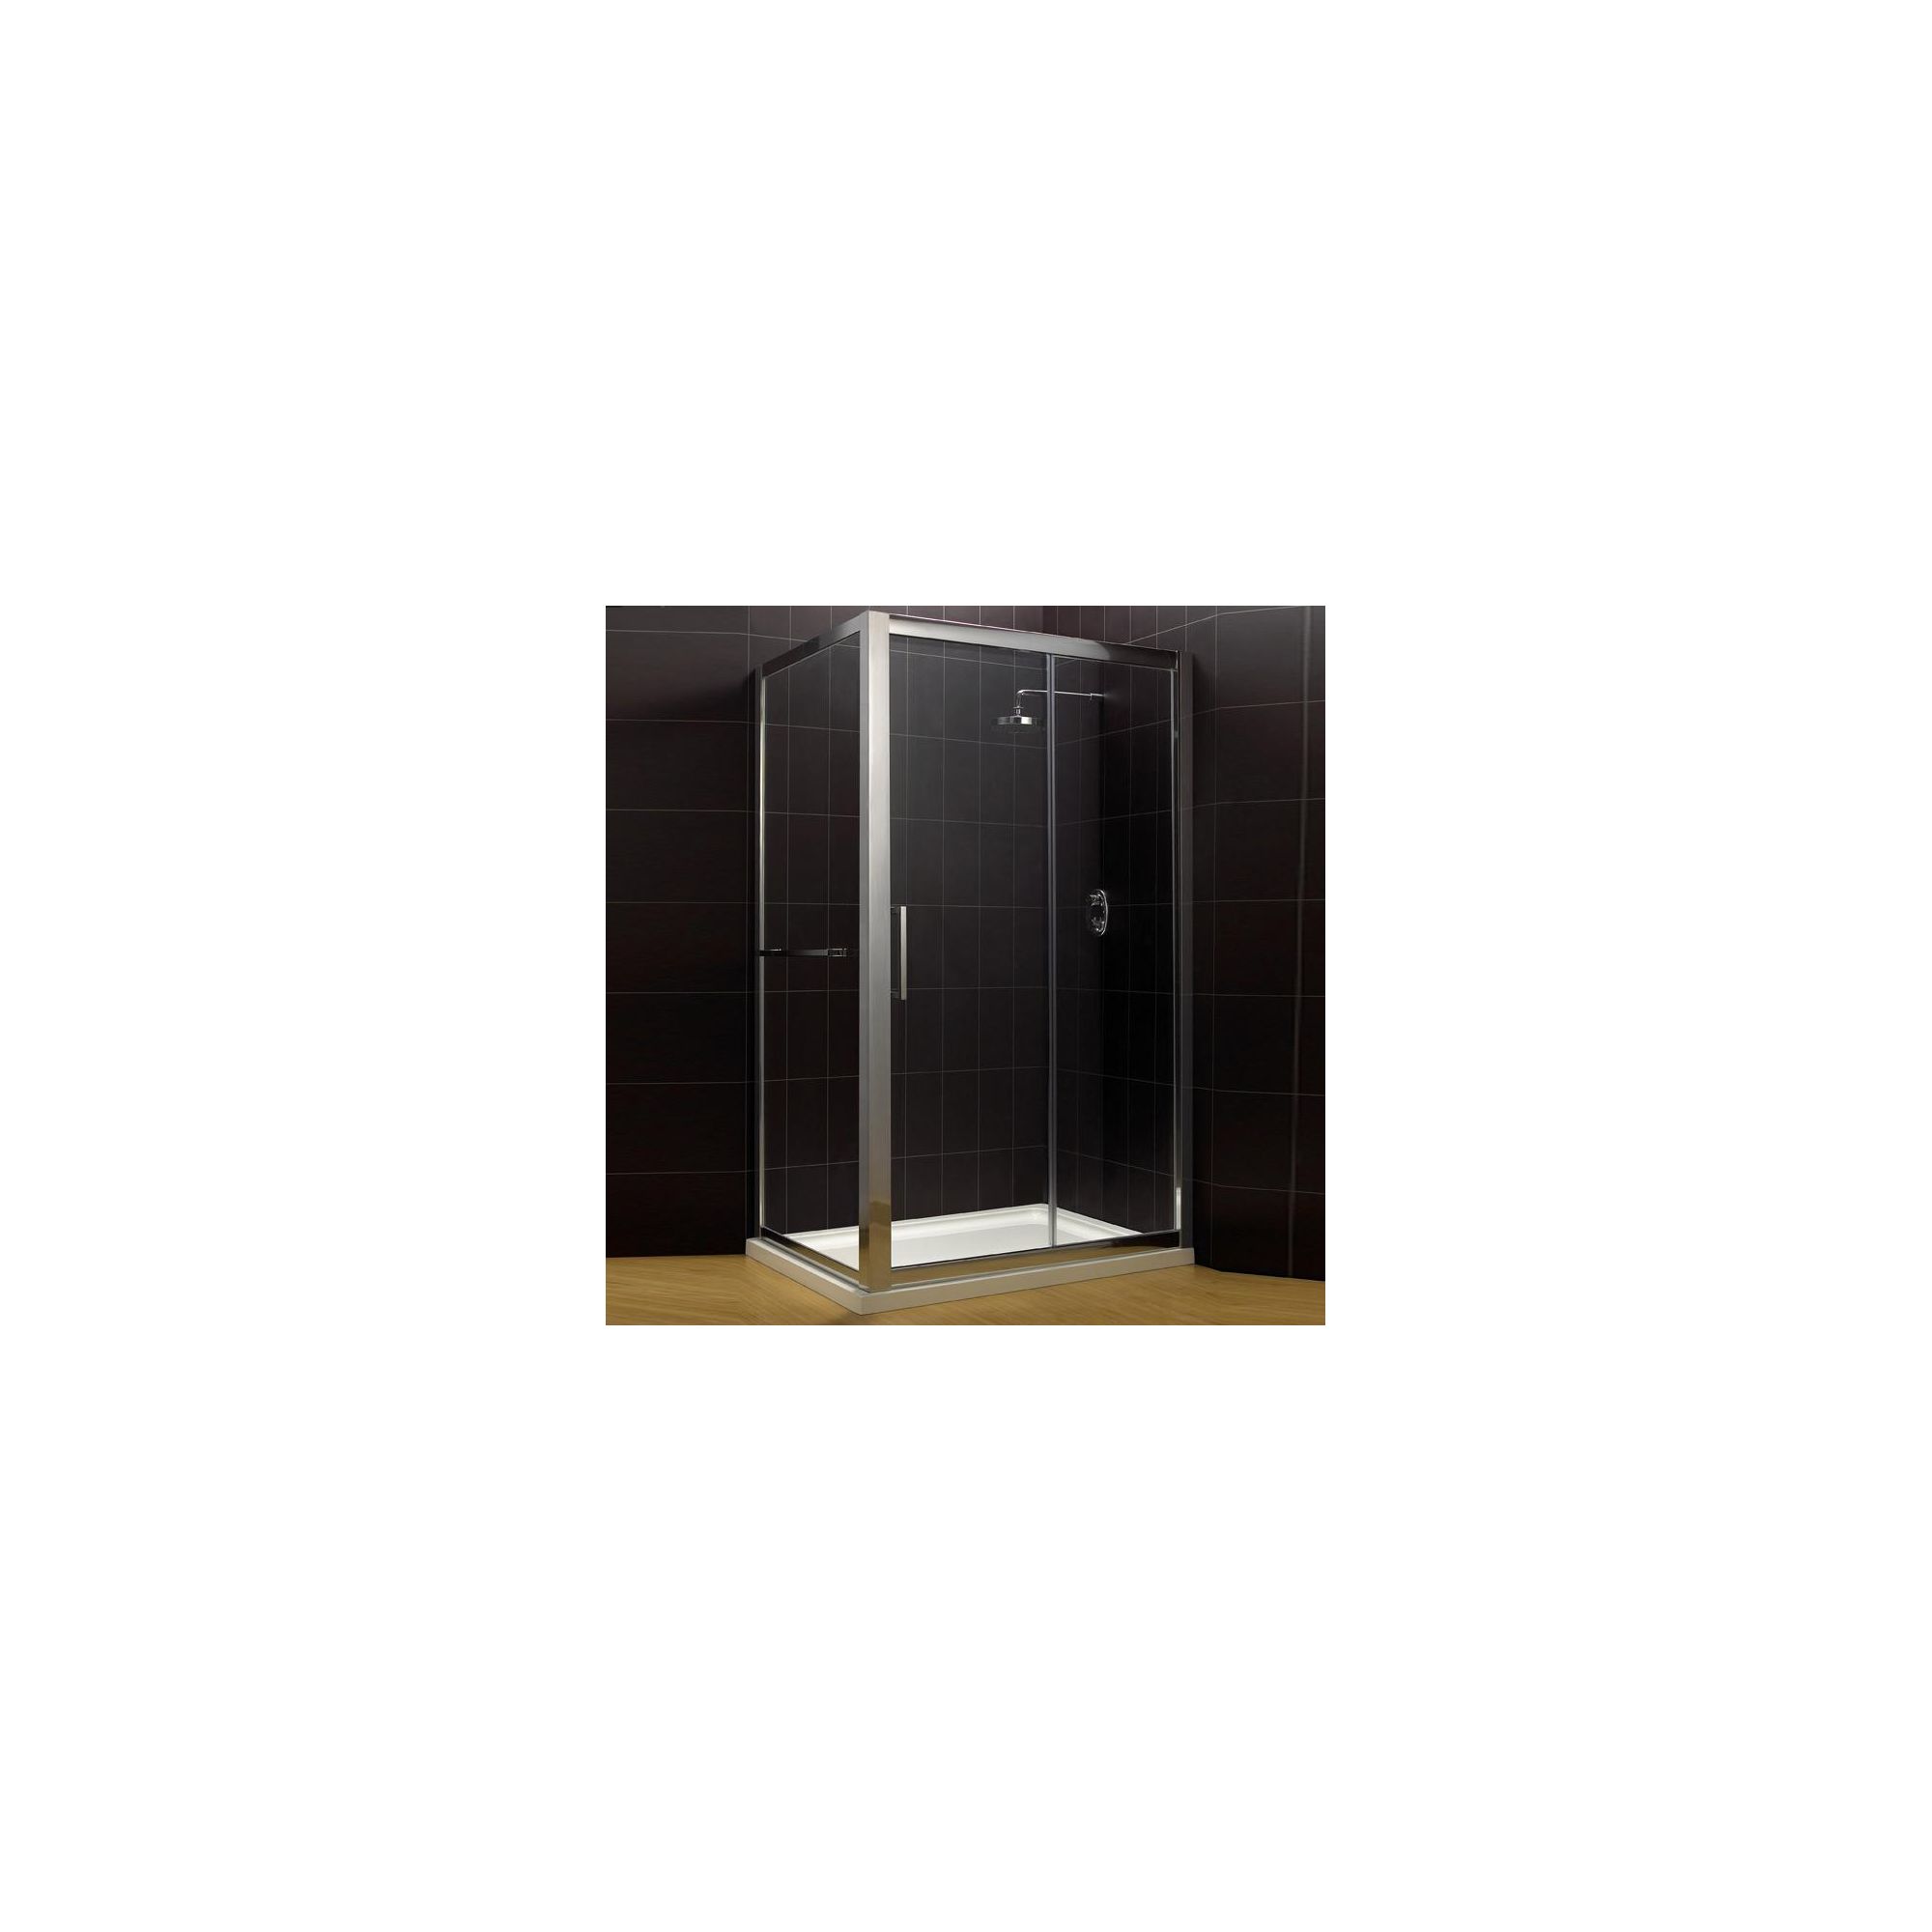 Duchy Supreme Silver Sliding Door Shower Enclosure, 1600mm x 760mm, Standard Tray, 8mm Glass at Tesco Direct